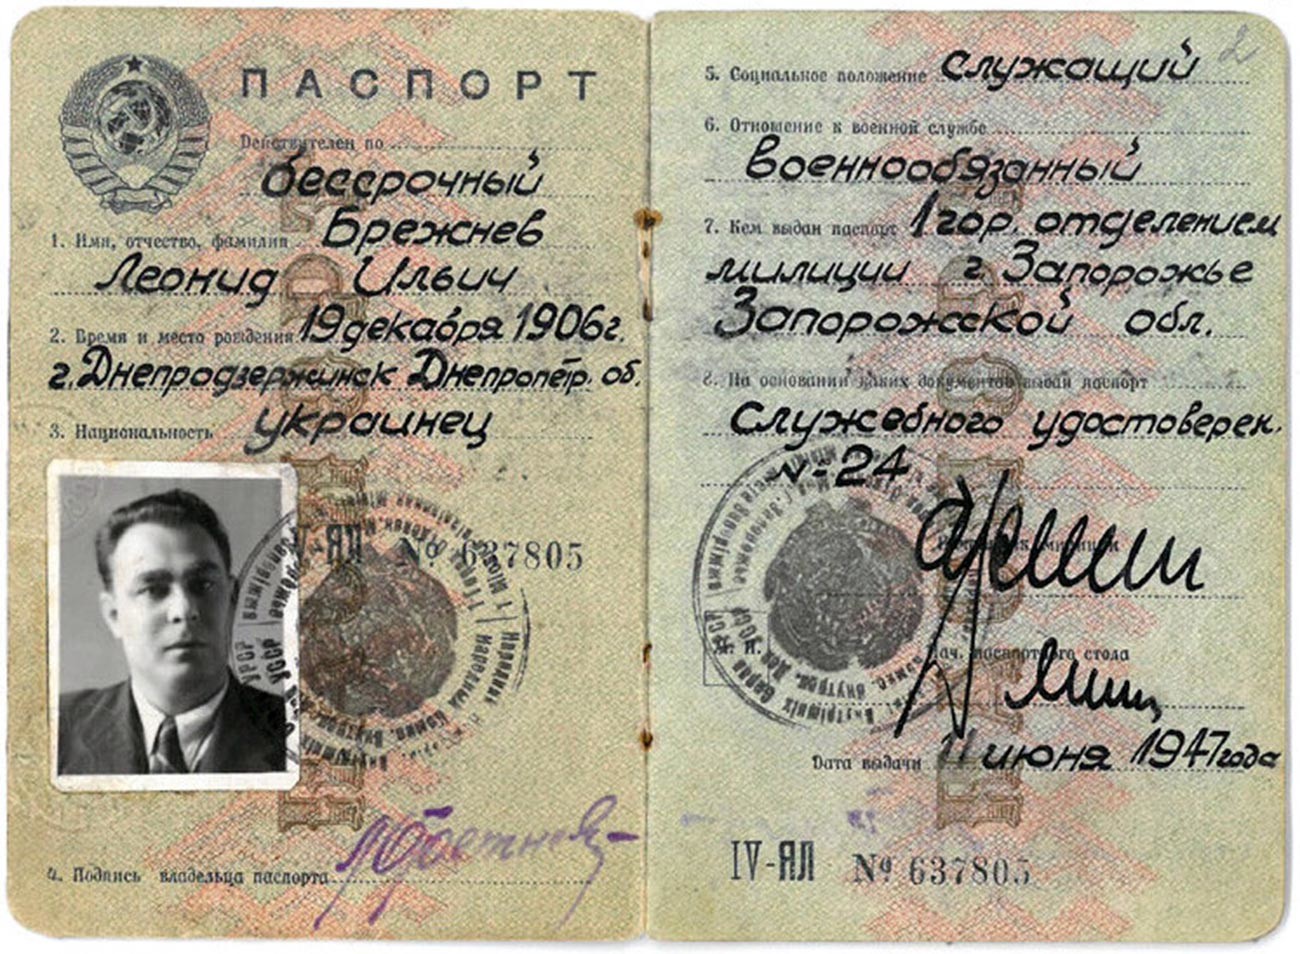 The passport of Leonid Brezhnev, General Secretary of the Executive Committee of the Communist Party of USSR